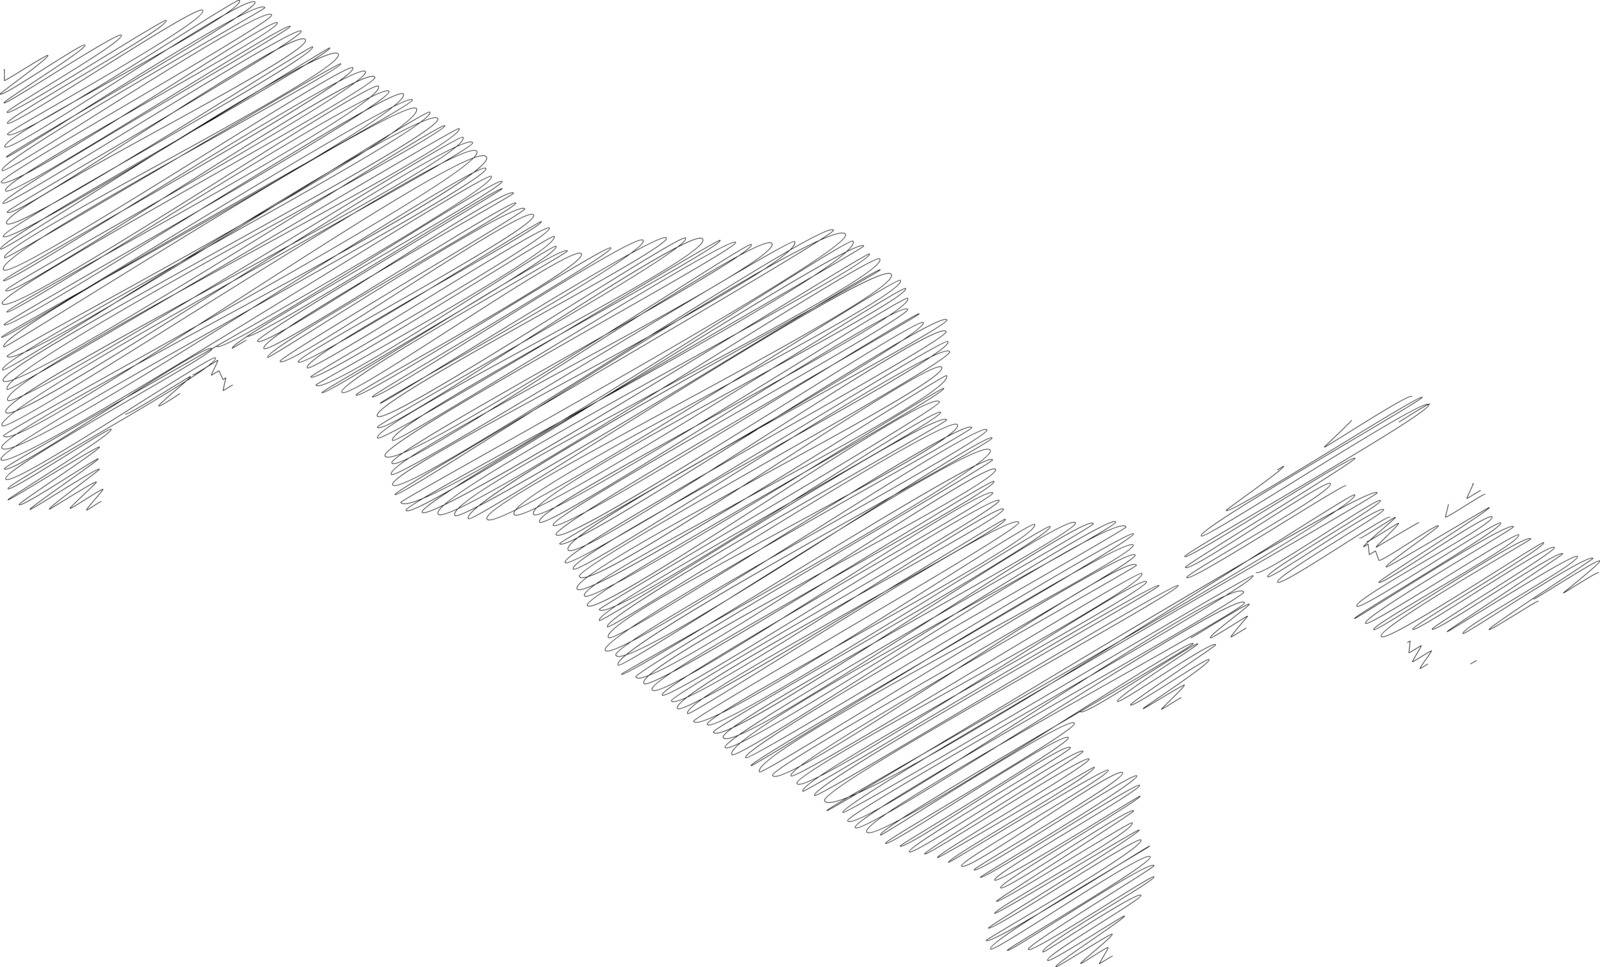 Uzbekistan - pencil scribble sketch silhouette map of country area with dropped shadow. Simple flat vector illustration.